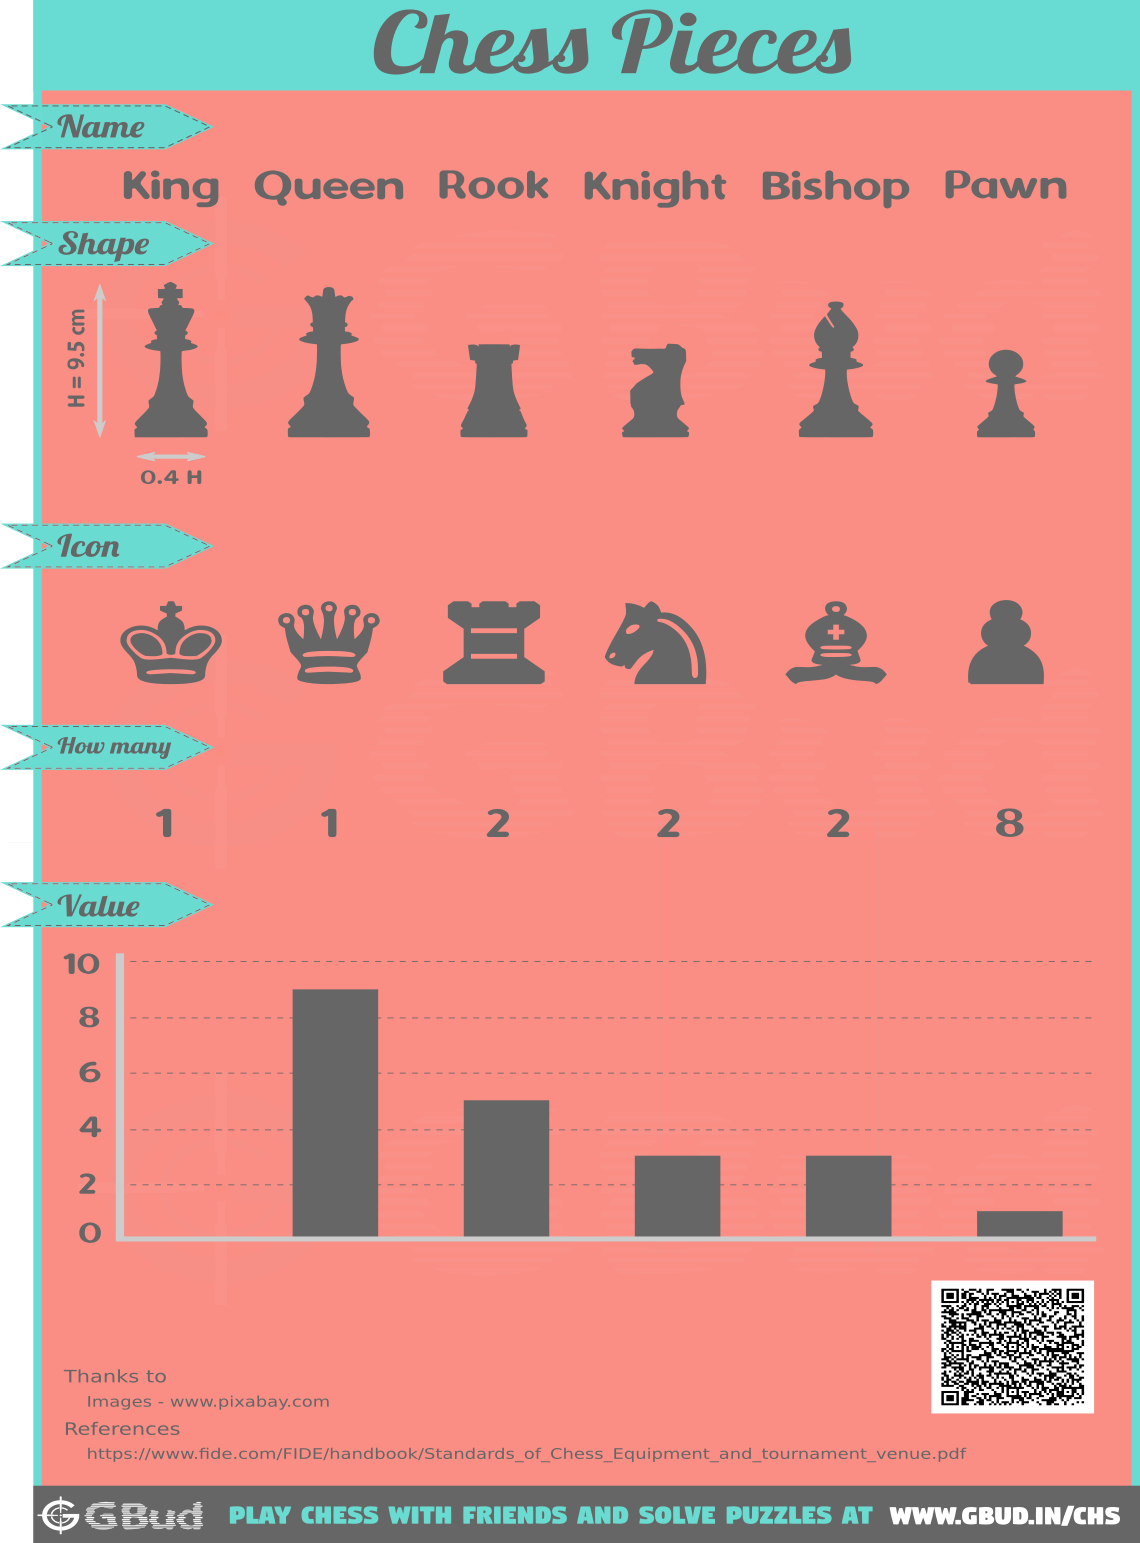 alternate names for chess pieces